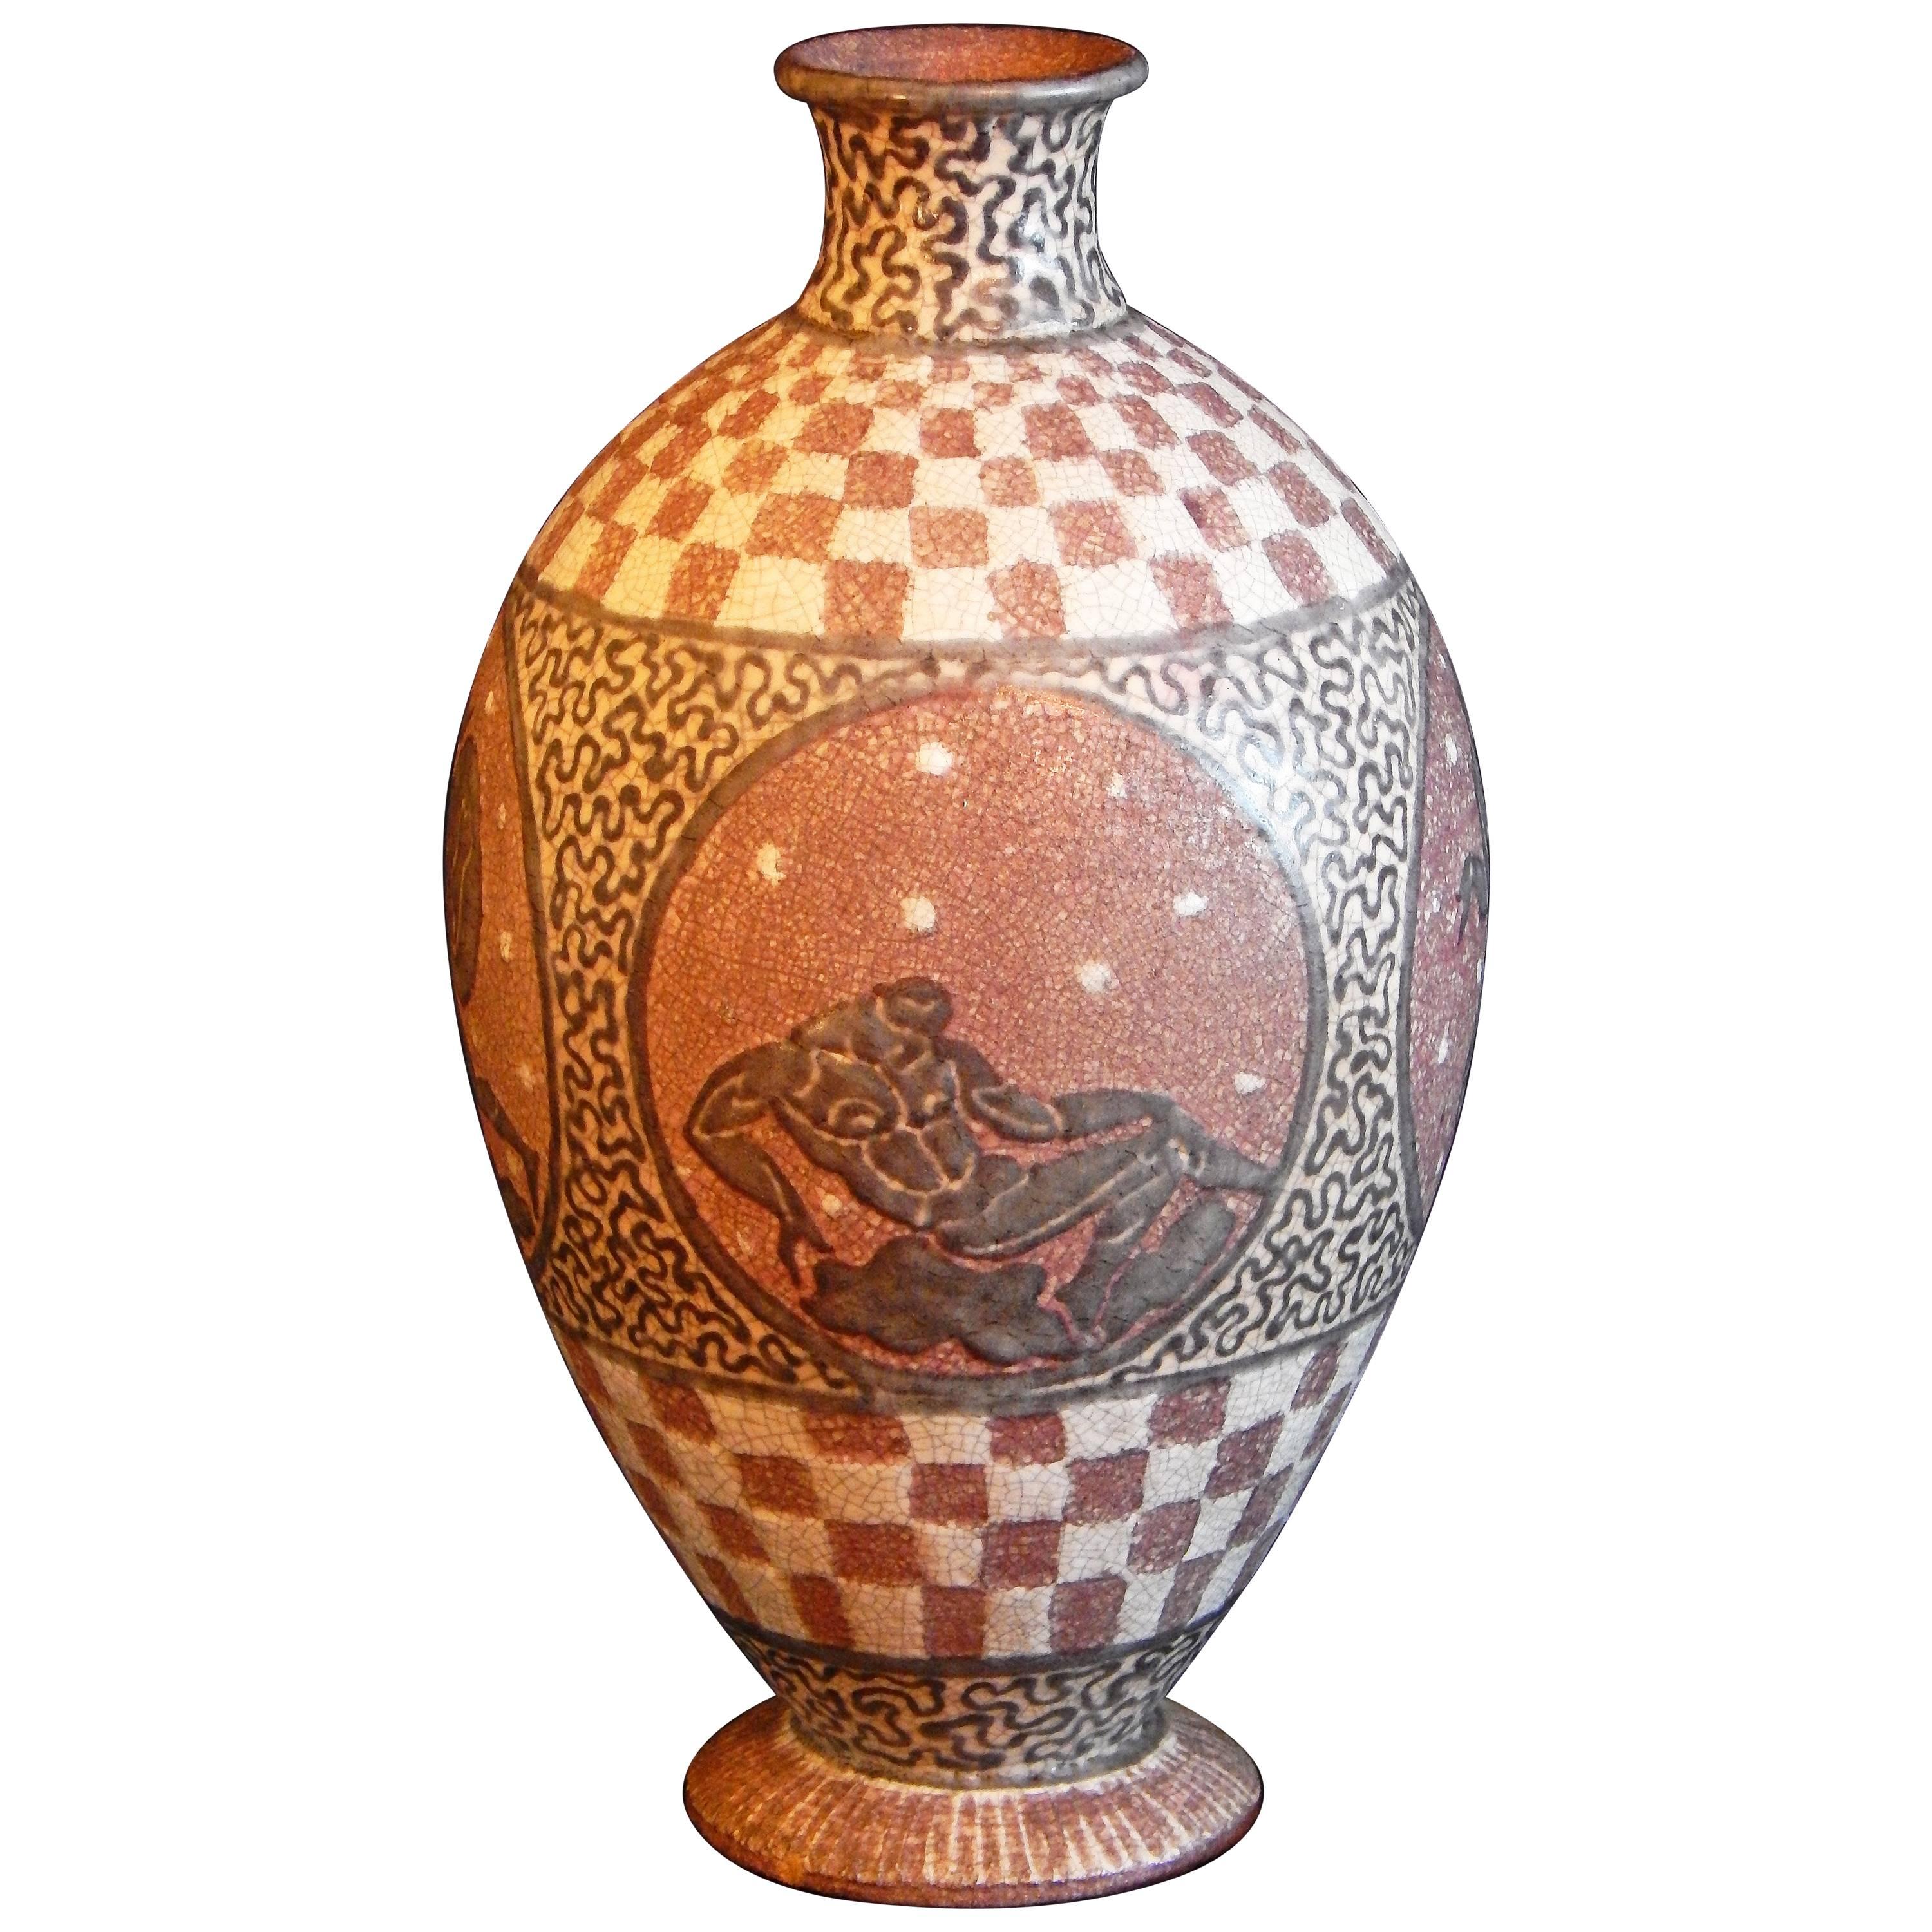 "Vase with Classical Nudes," Rare, Unique Vase with Male Nudes by Mayodon